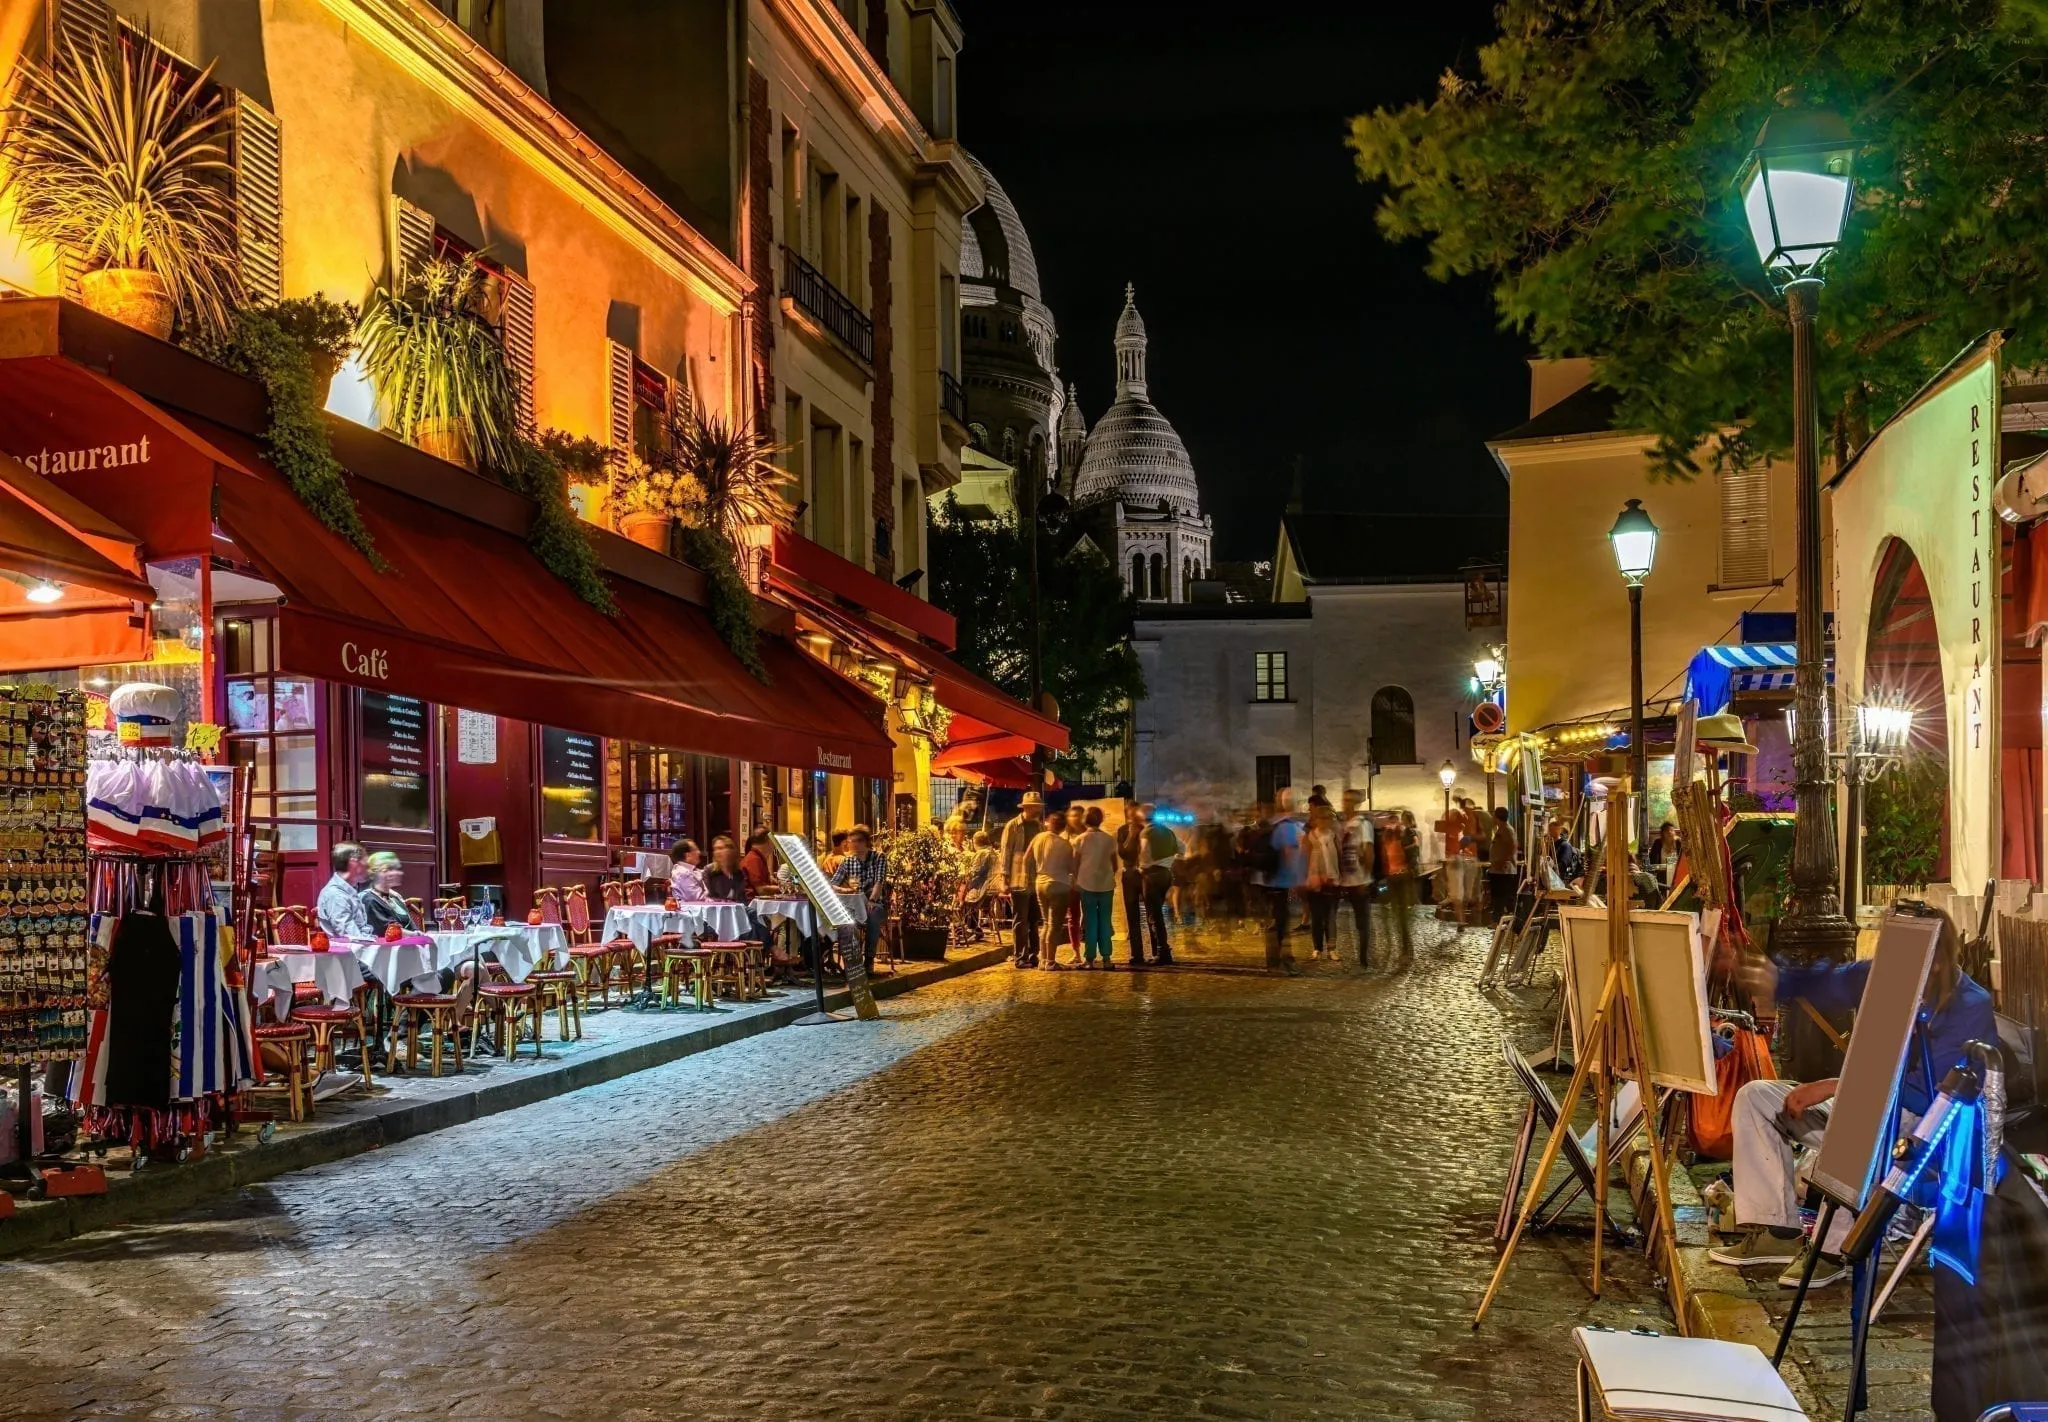 Montmartre street scene with cafes to the left. Montmartre is one of the best neighborhoods to visit when deciding what to do in Paris at night